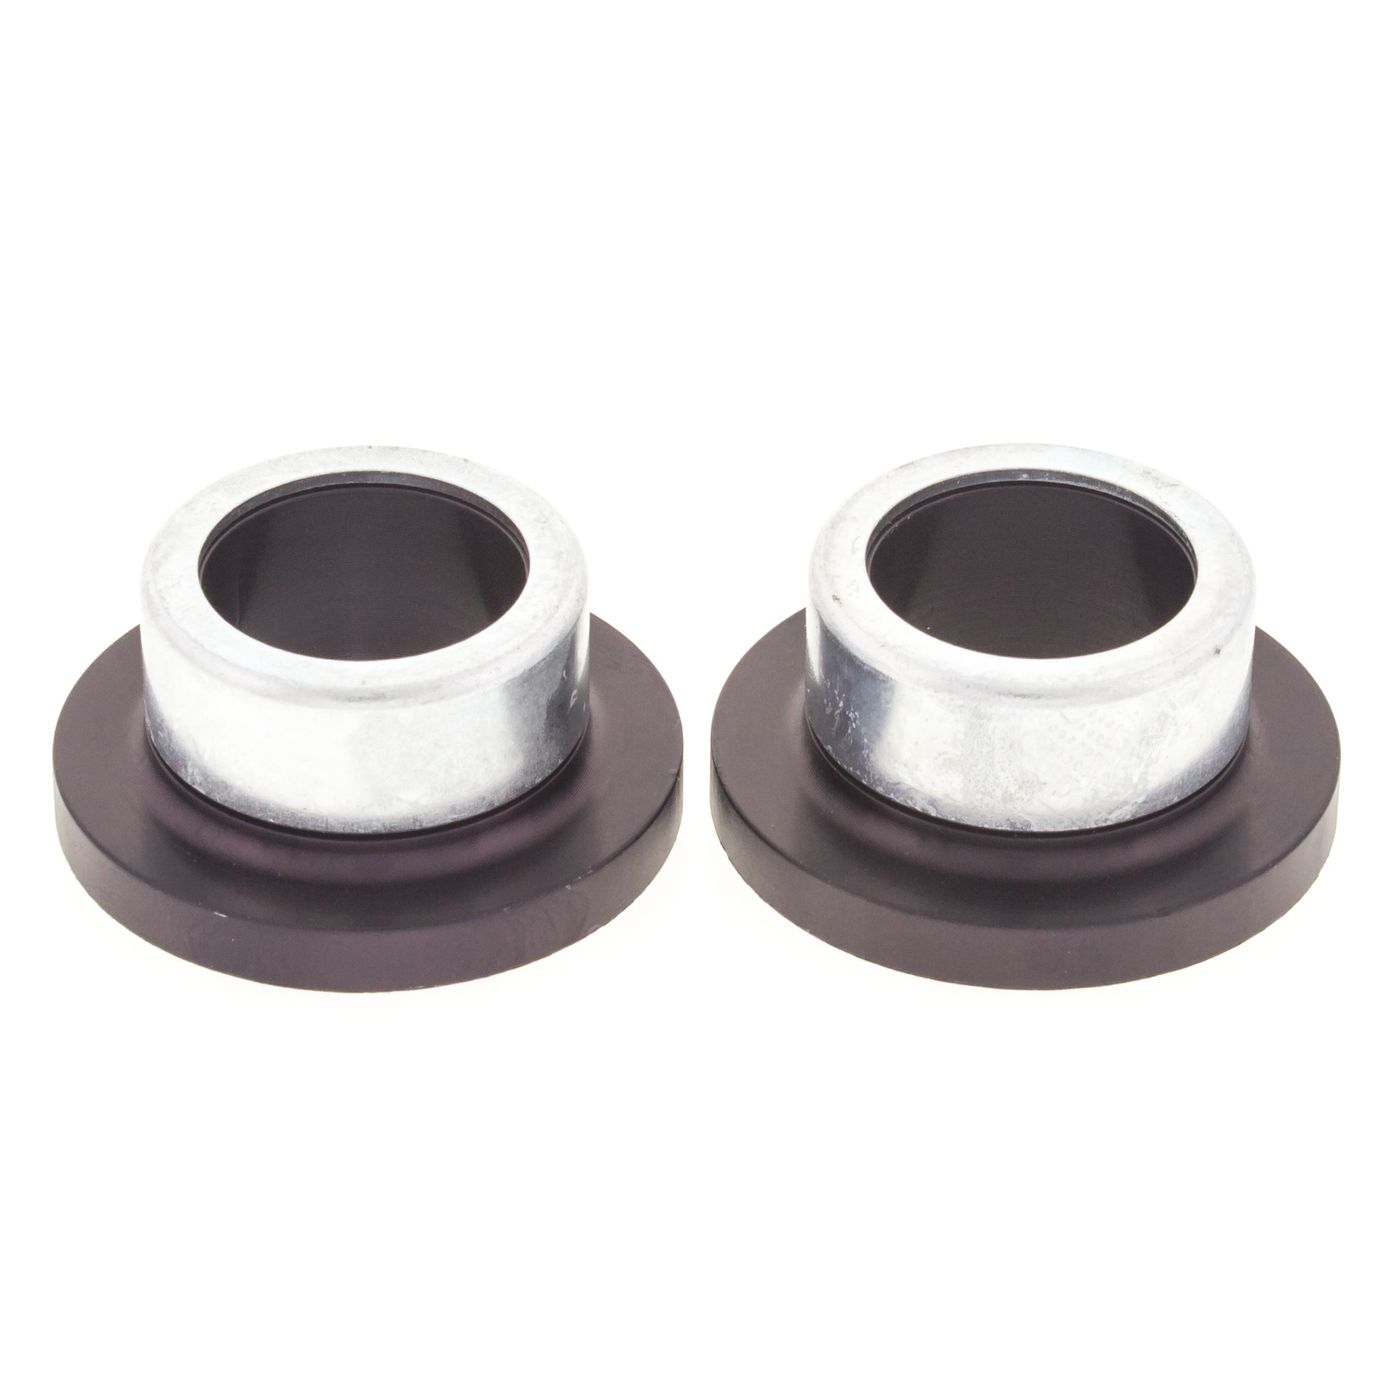 Wrp Rear Wheel Spacer Kits - WRP111022-1 image